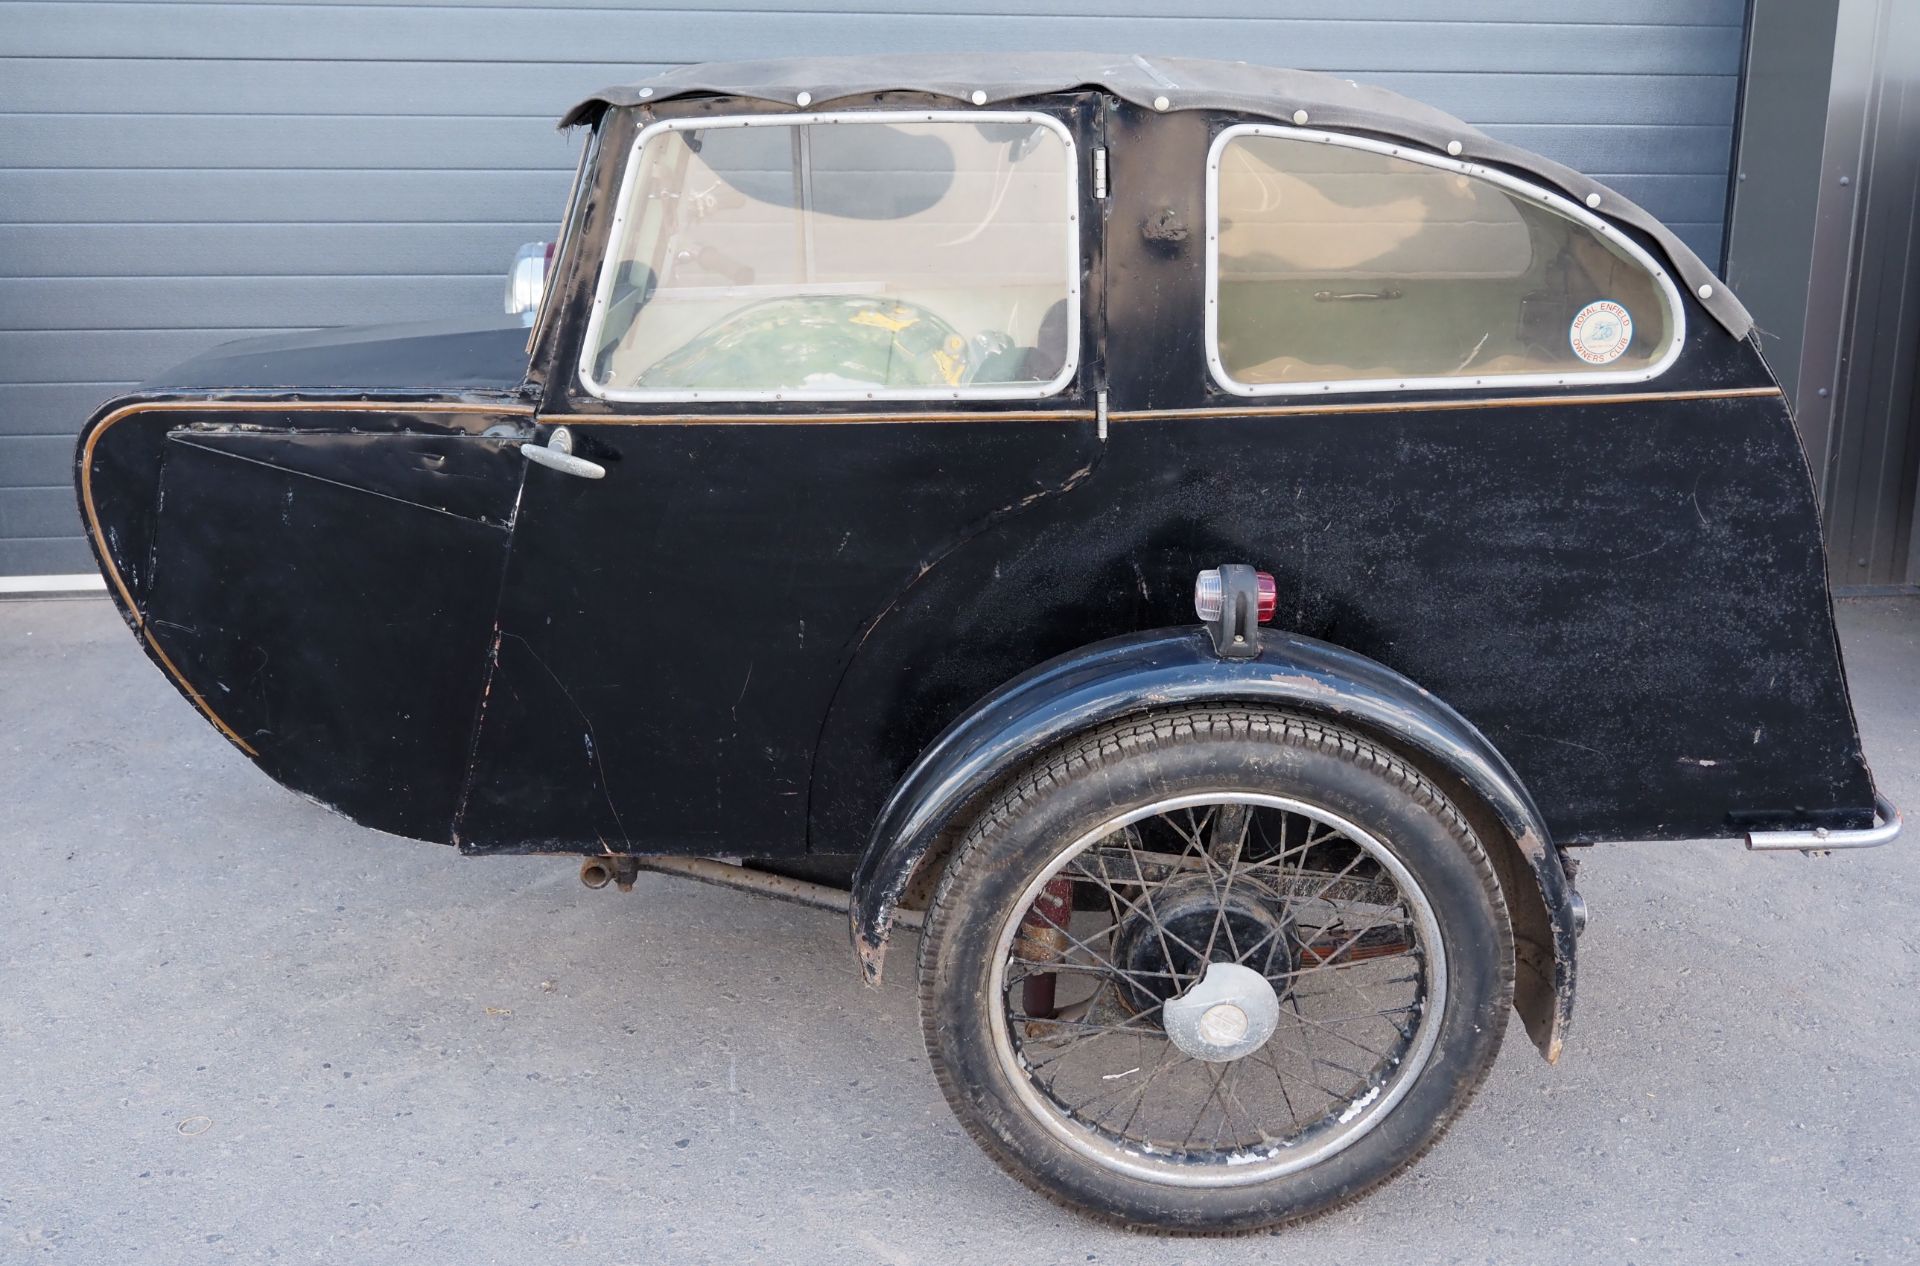 Royal Enfield Meteor sidecar outfit. 1956. 700ccFrame No. 713430Runs but has been dry stored for - Image 6 of 6